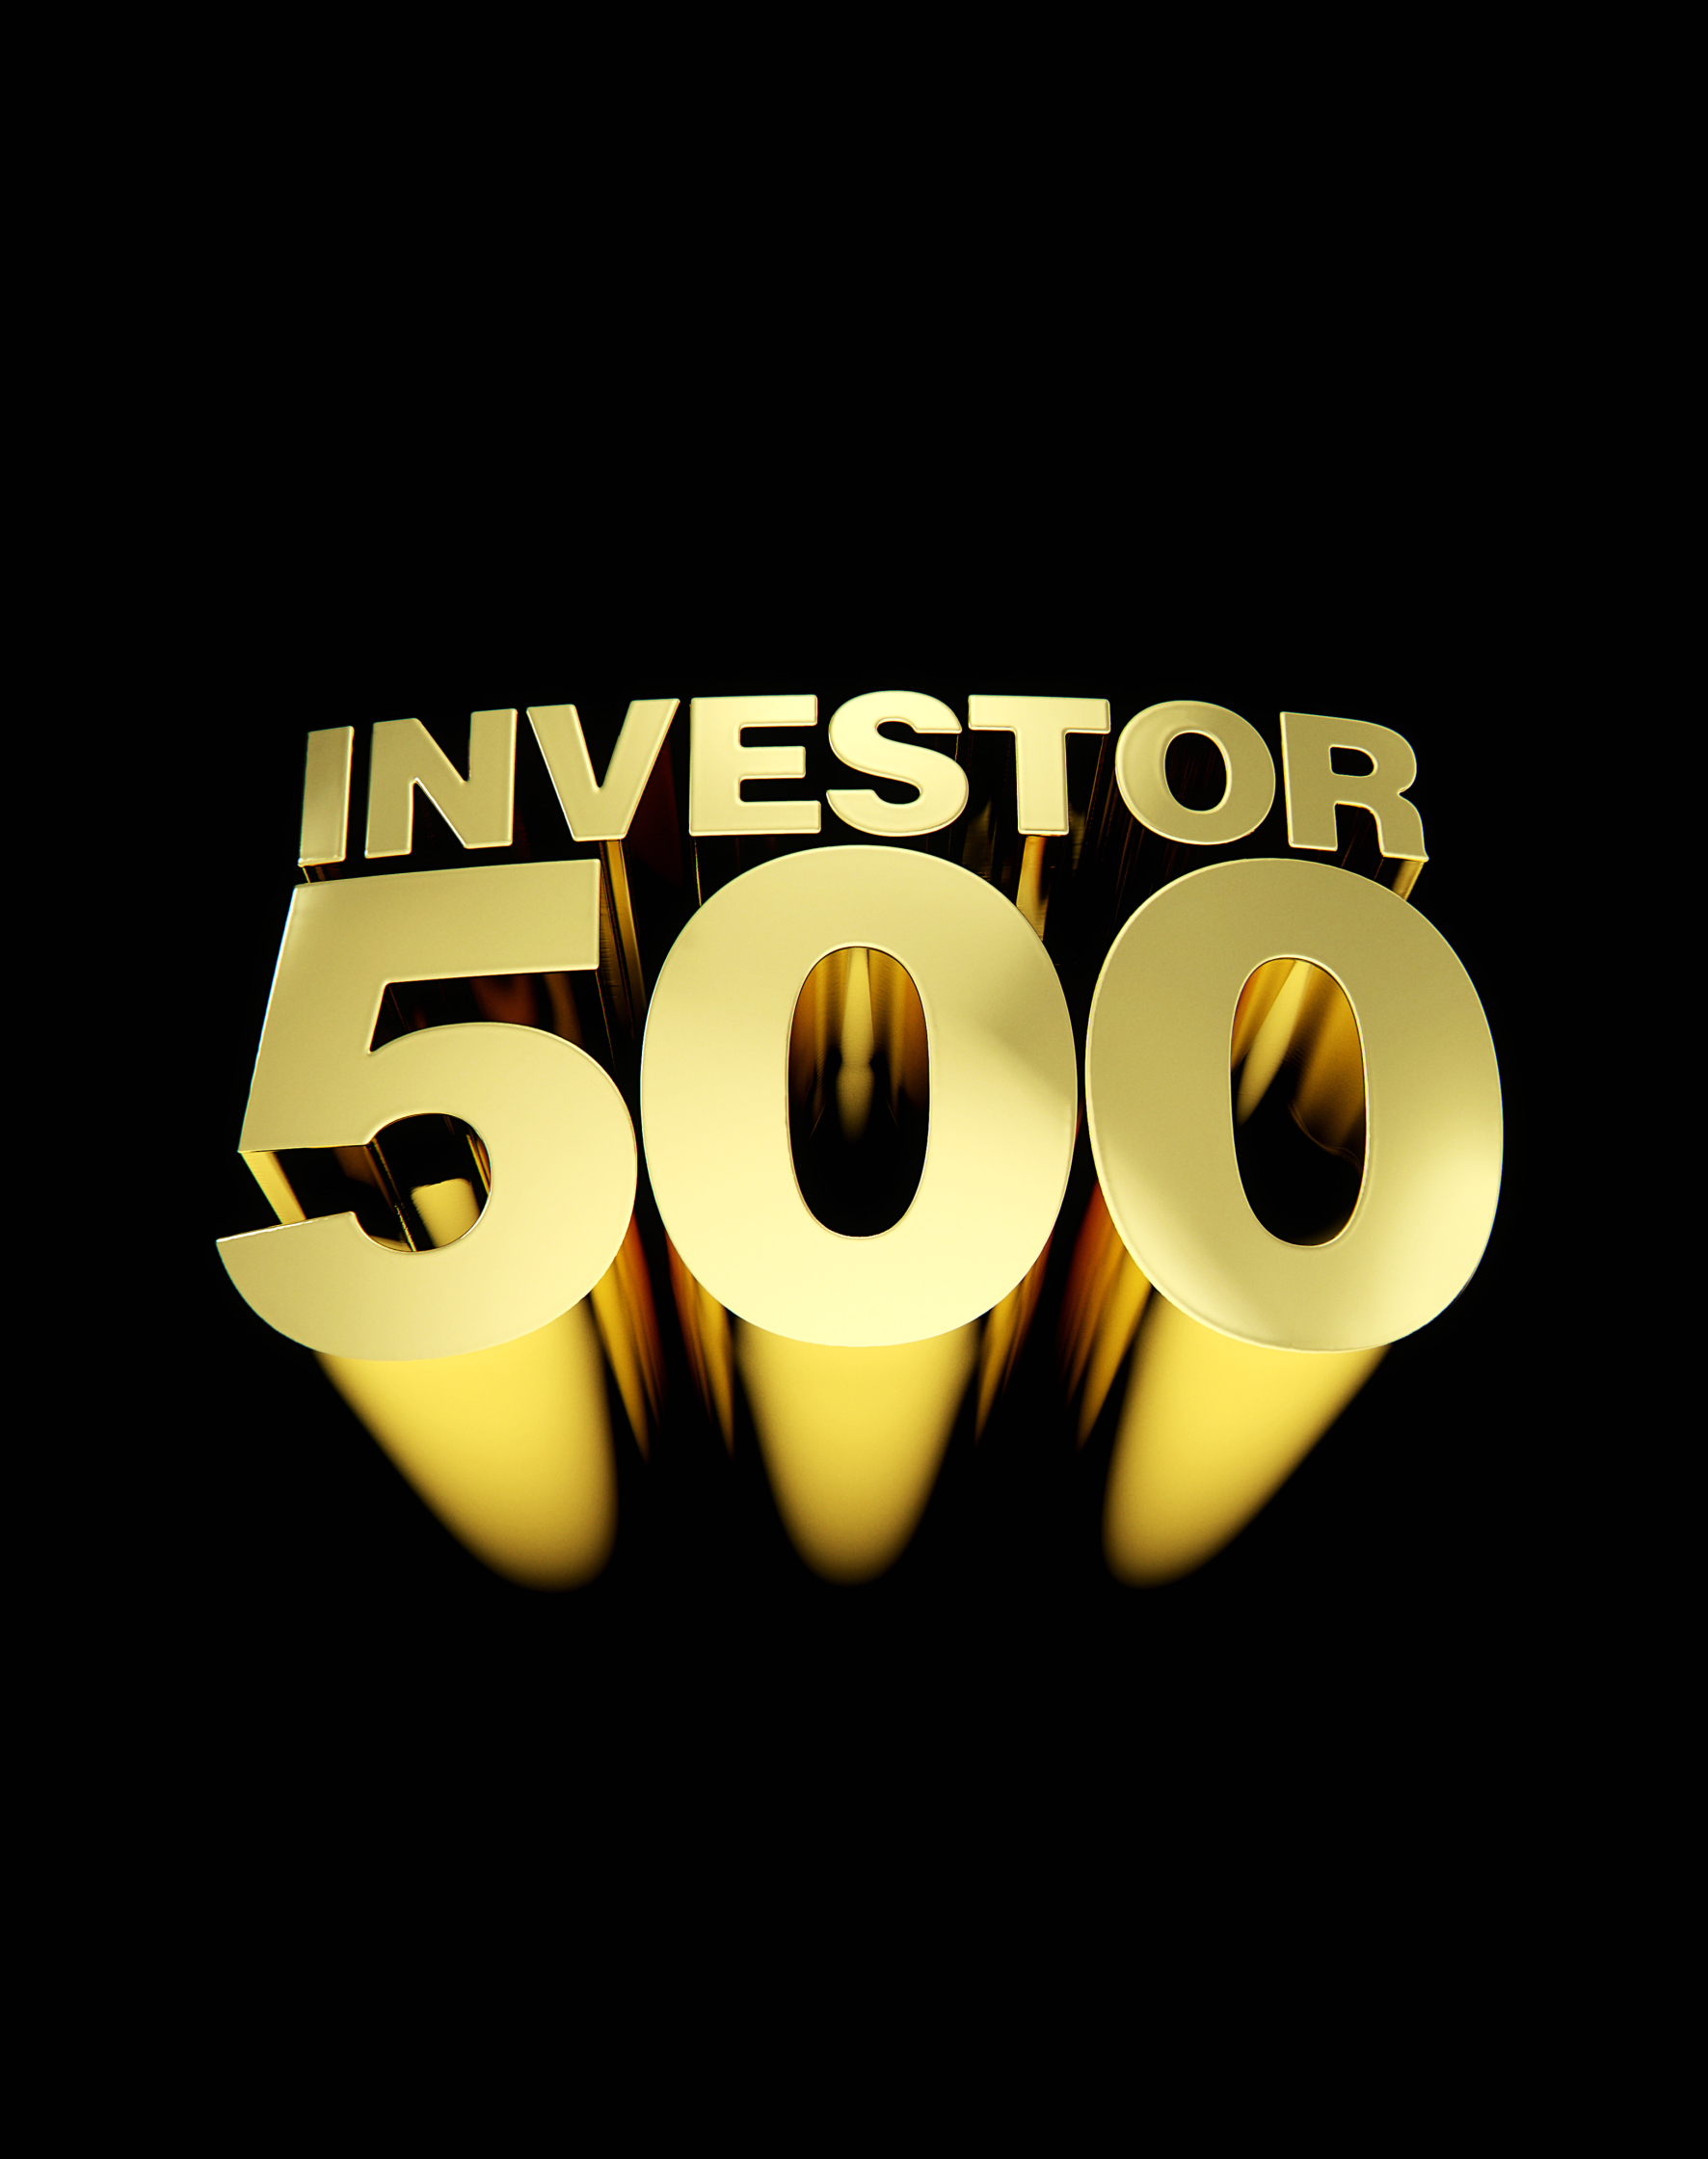 Cover Investor 500 3D Type Gold Canadian Business Magazine